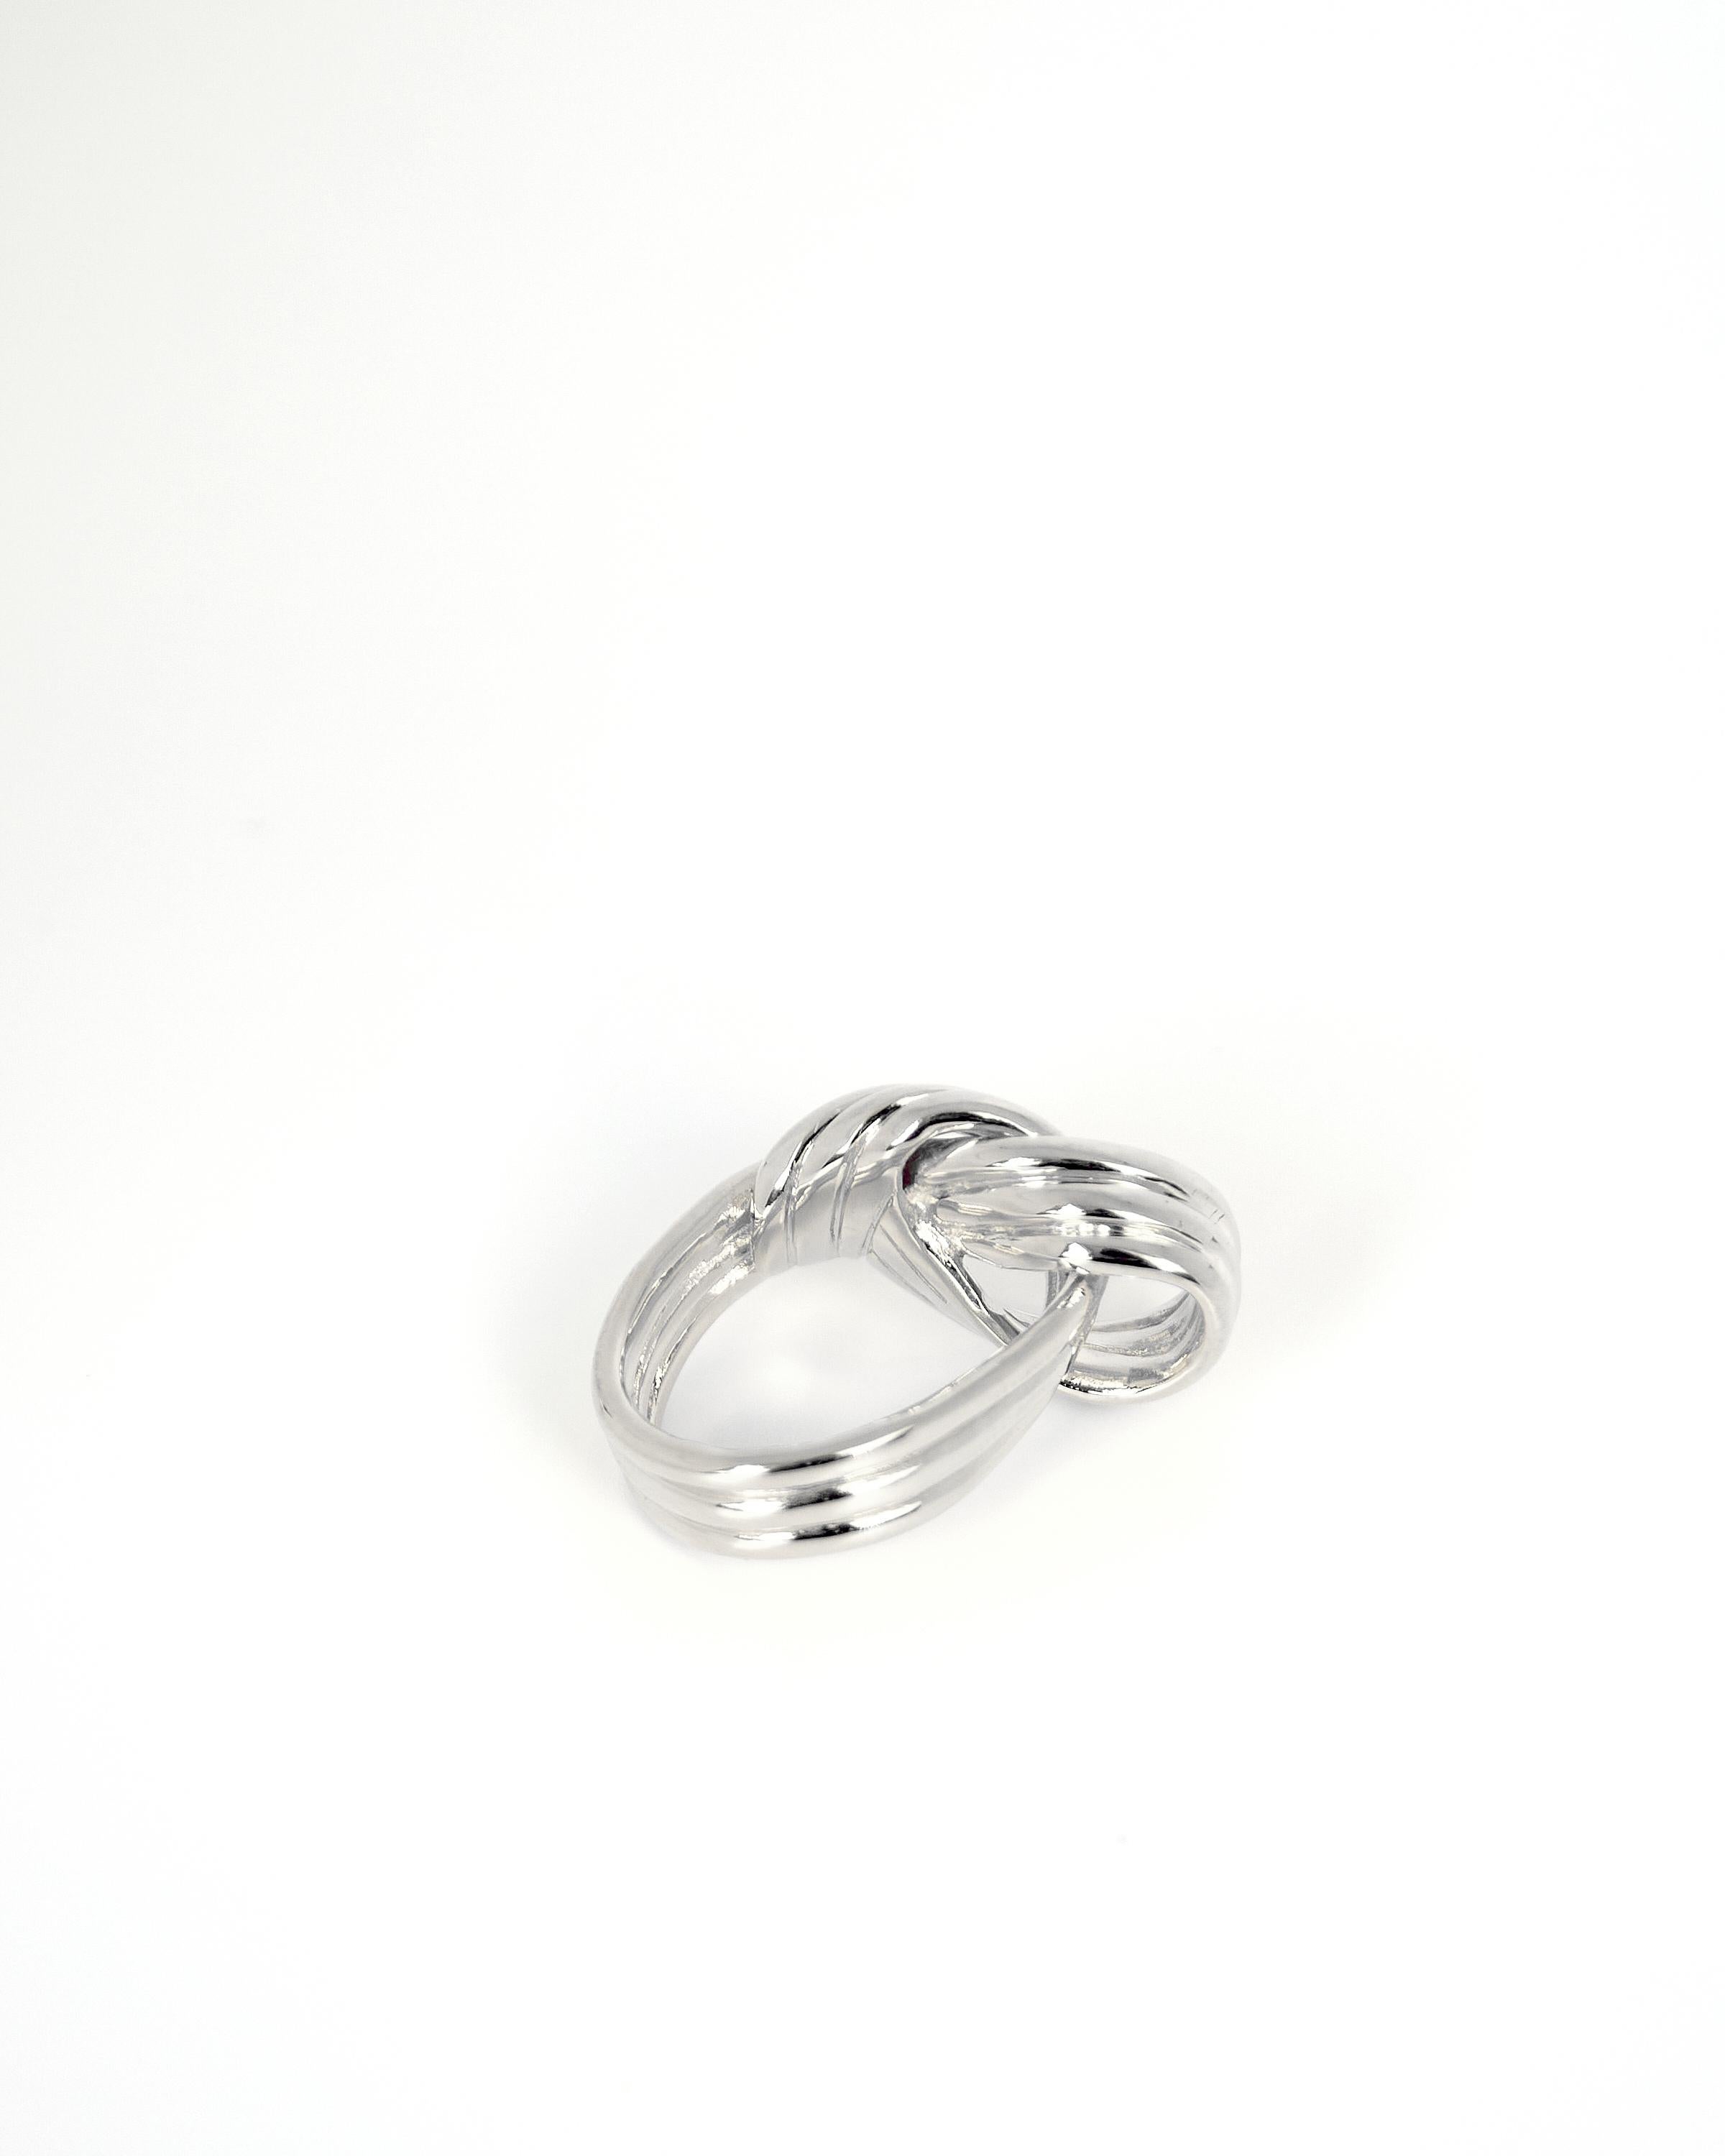 70s Inspired Braid Ring in Recycled Silver (Large) In New Condition For Sale In London, GB